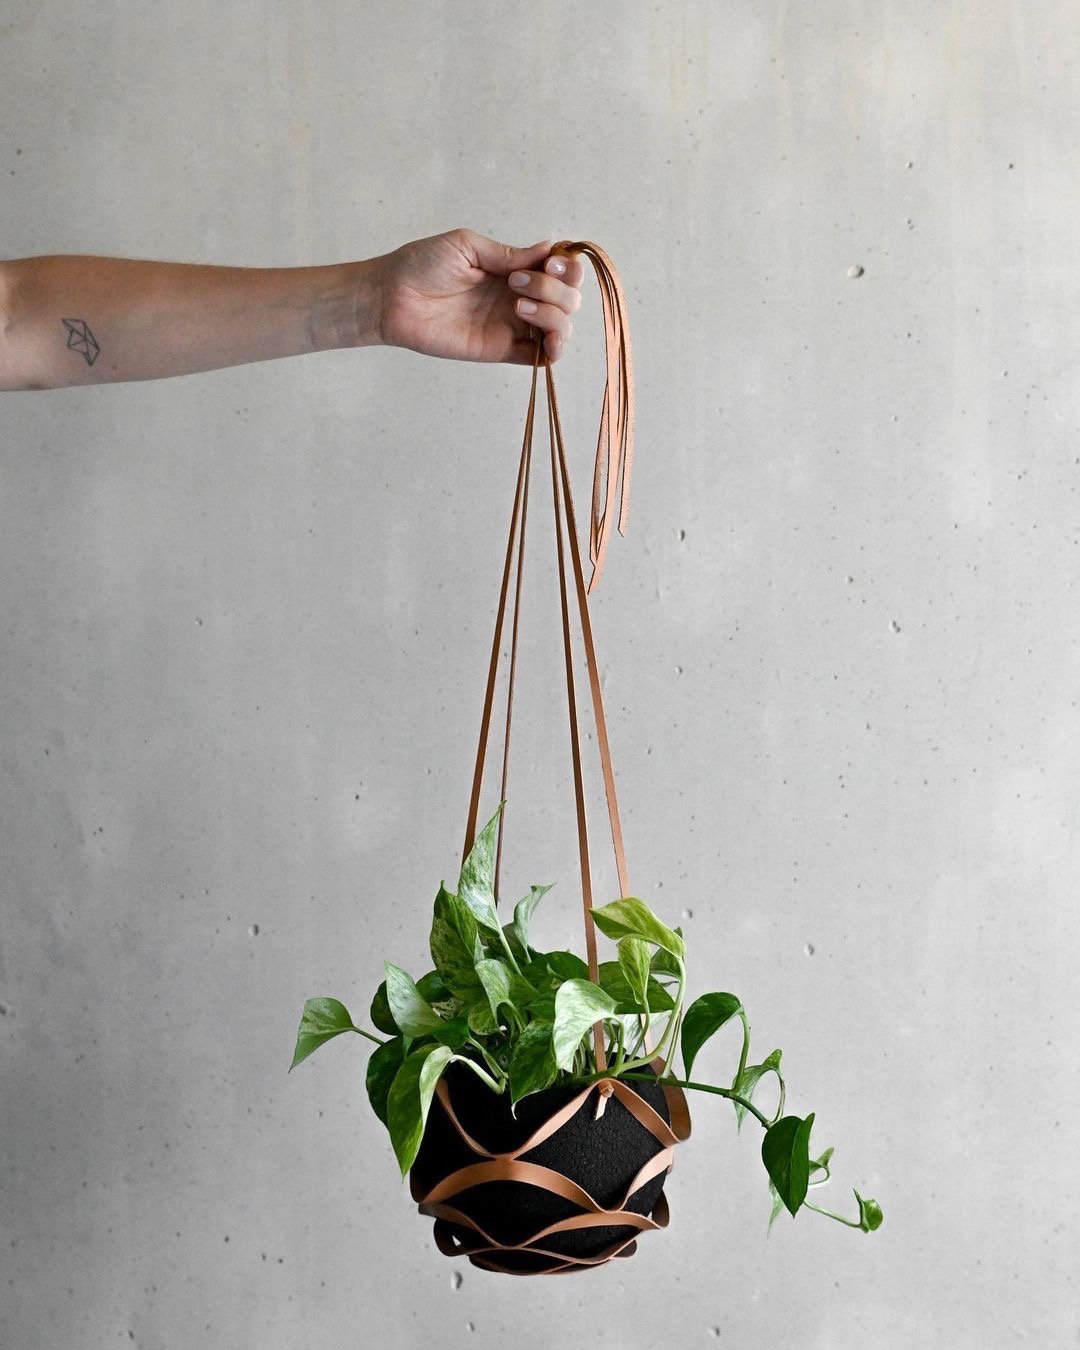 Hänggi plant basket for hanging from alimone